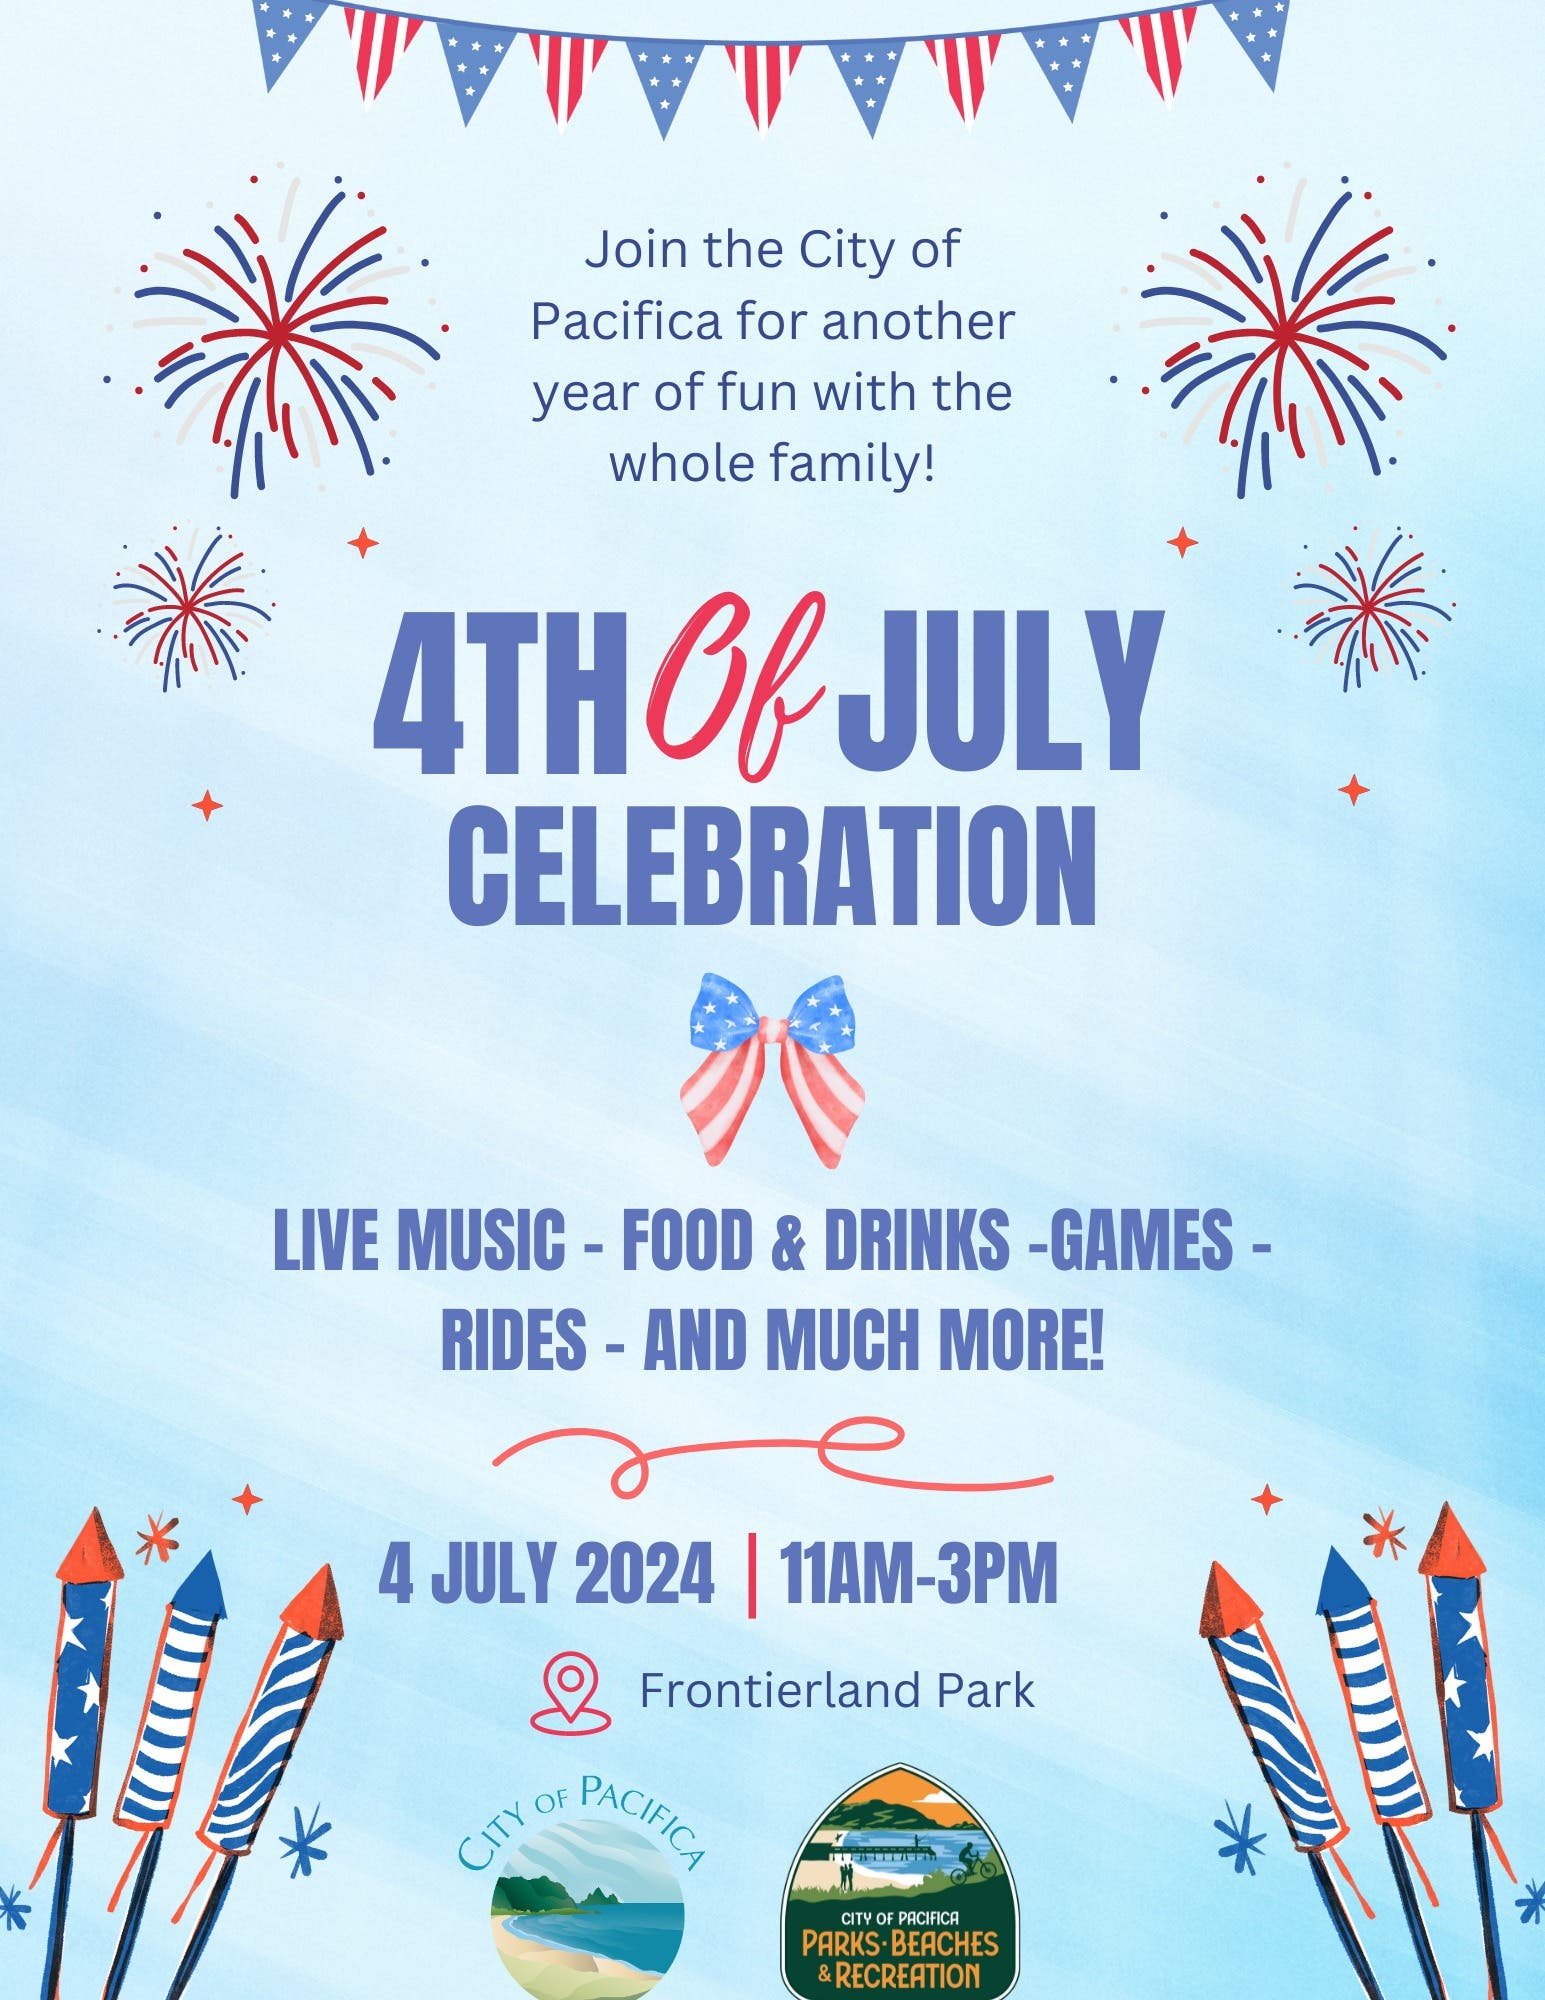 4th Of July Celebration 2024: Frontierland Park, Pacifica